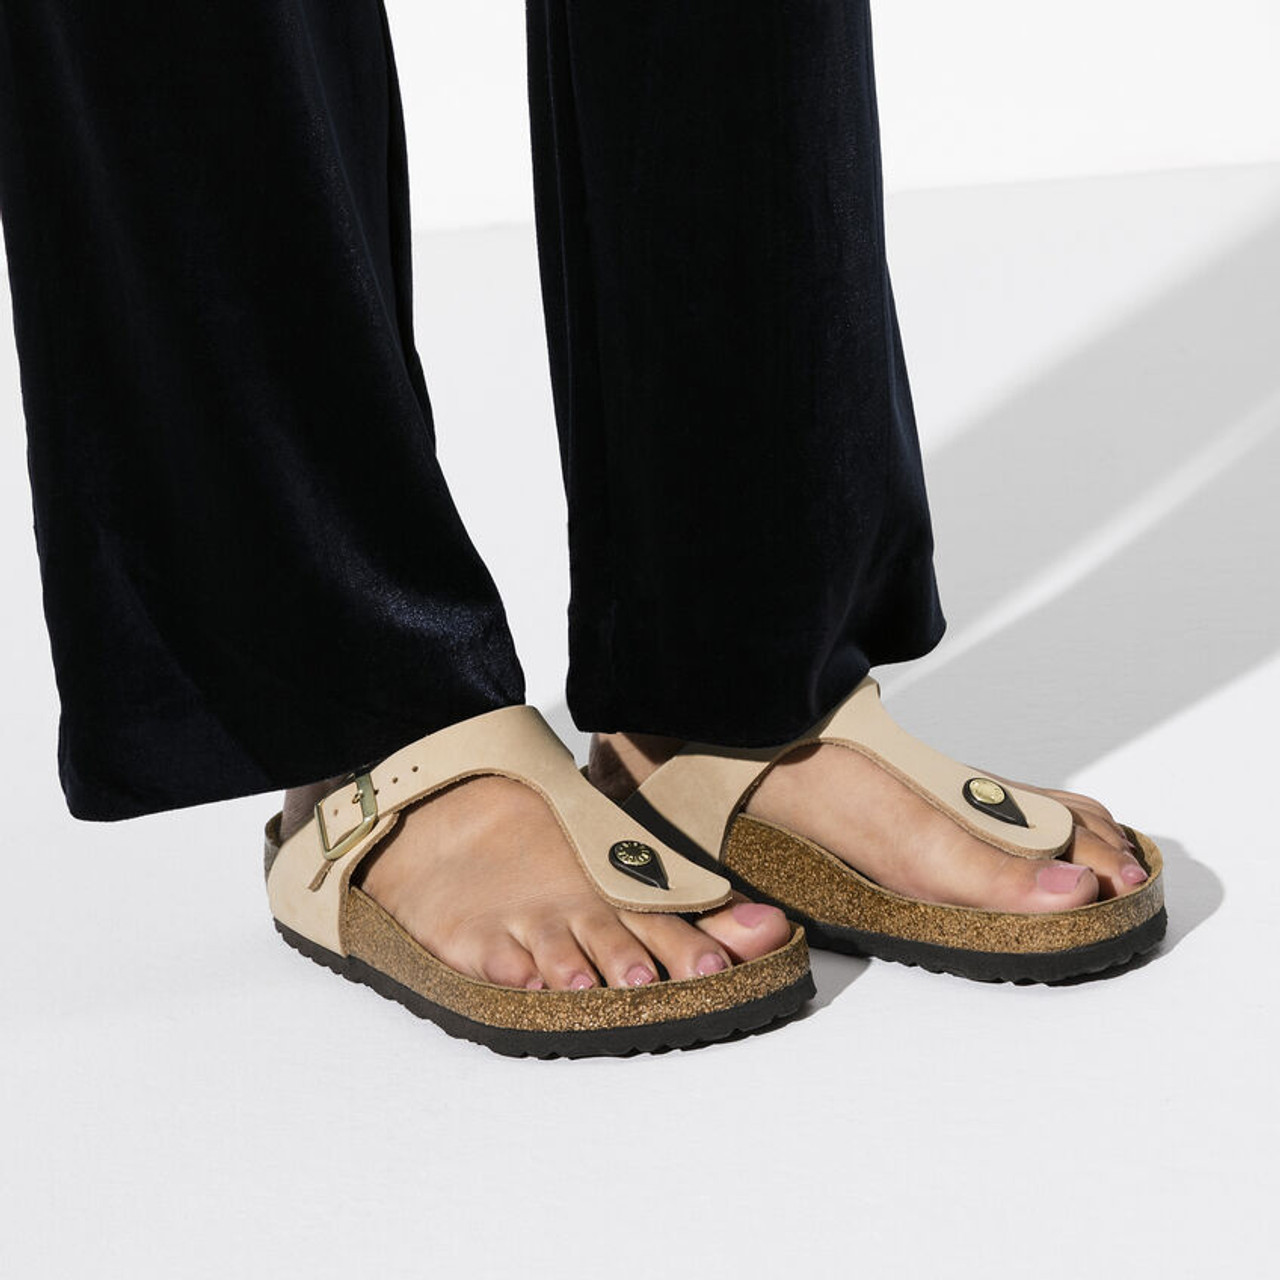 Birkenstock Sandals Are on Sale at Gilt for a Limited Time